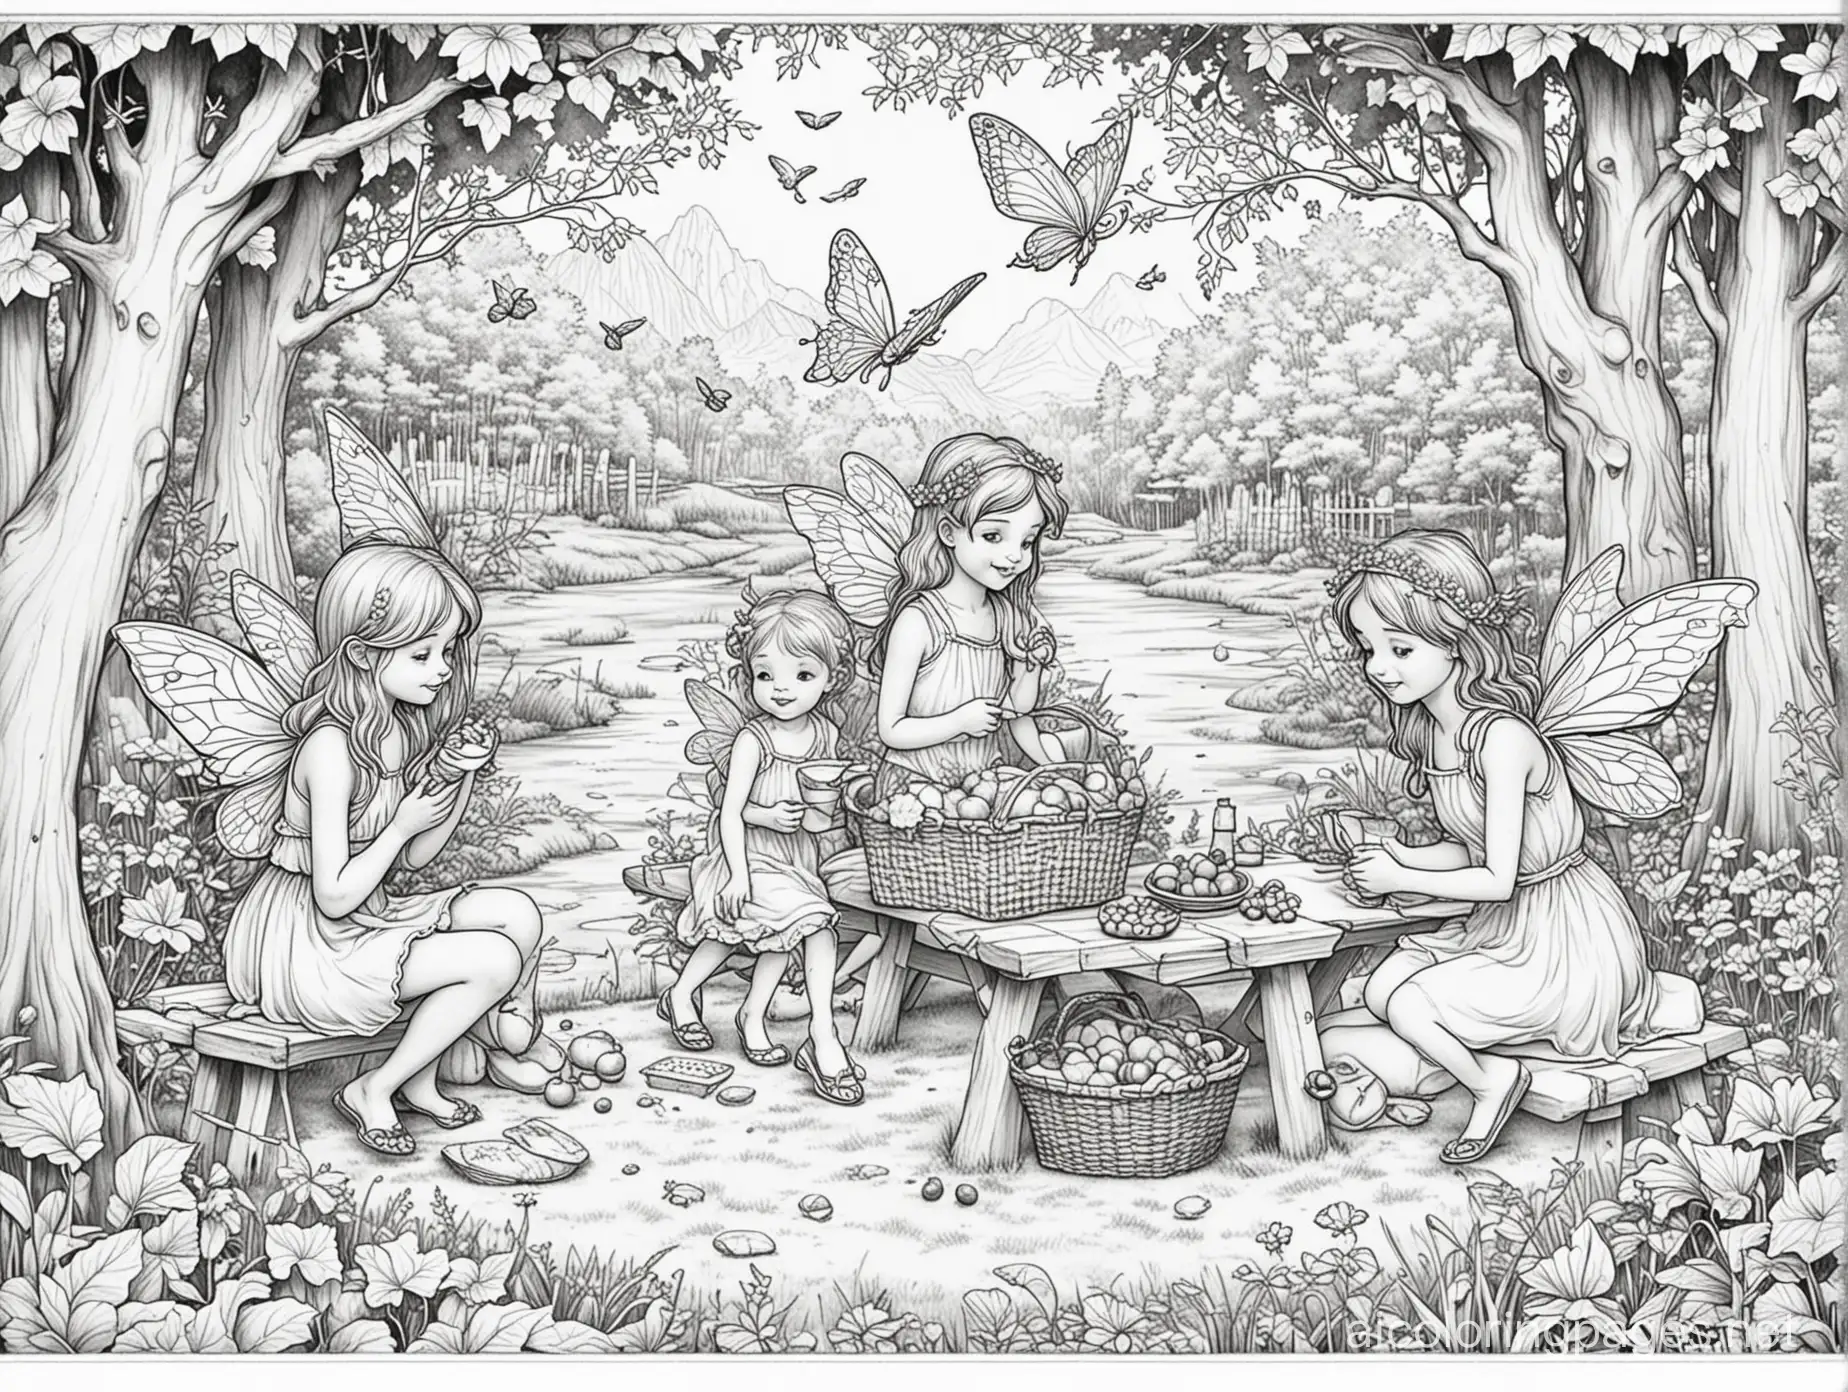 A simple picnic scene with with fairies , Coloring Page, black and white, line art, white background, Simplicity, Ample White Space. The background of the coloring page is plain white to make it easy for young children to color within the lines. The outlines of all the subjects are easy to distinguish, making it simple for kids to color without too much difficulty